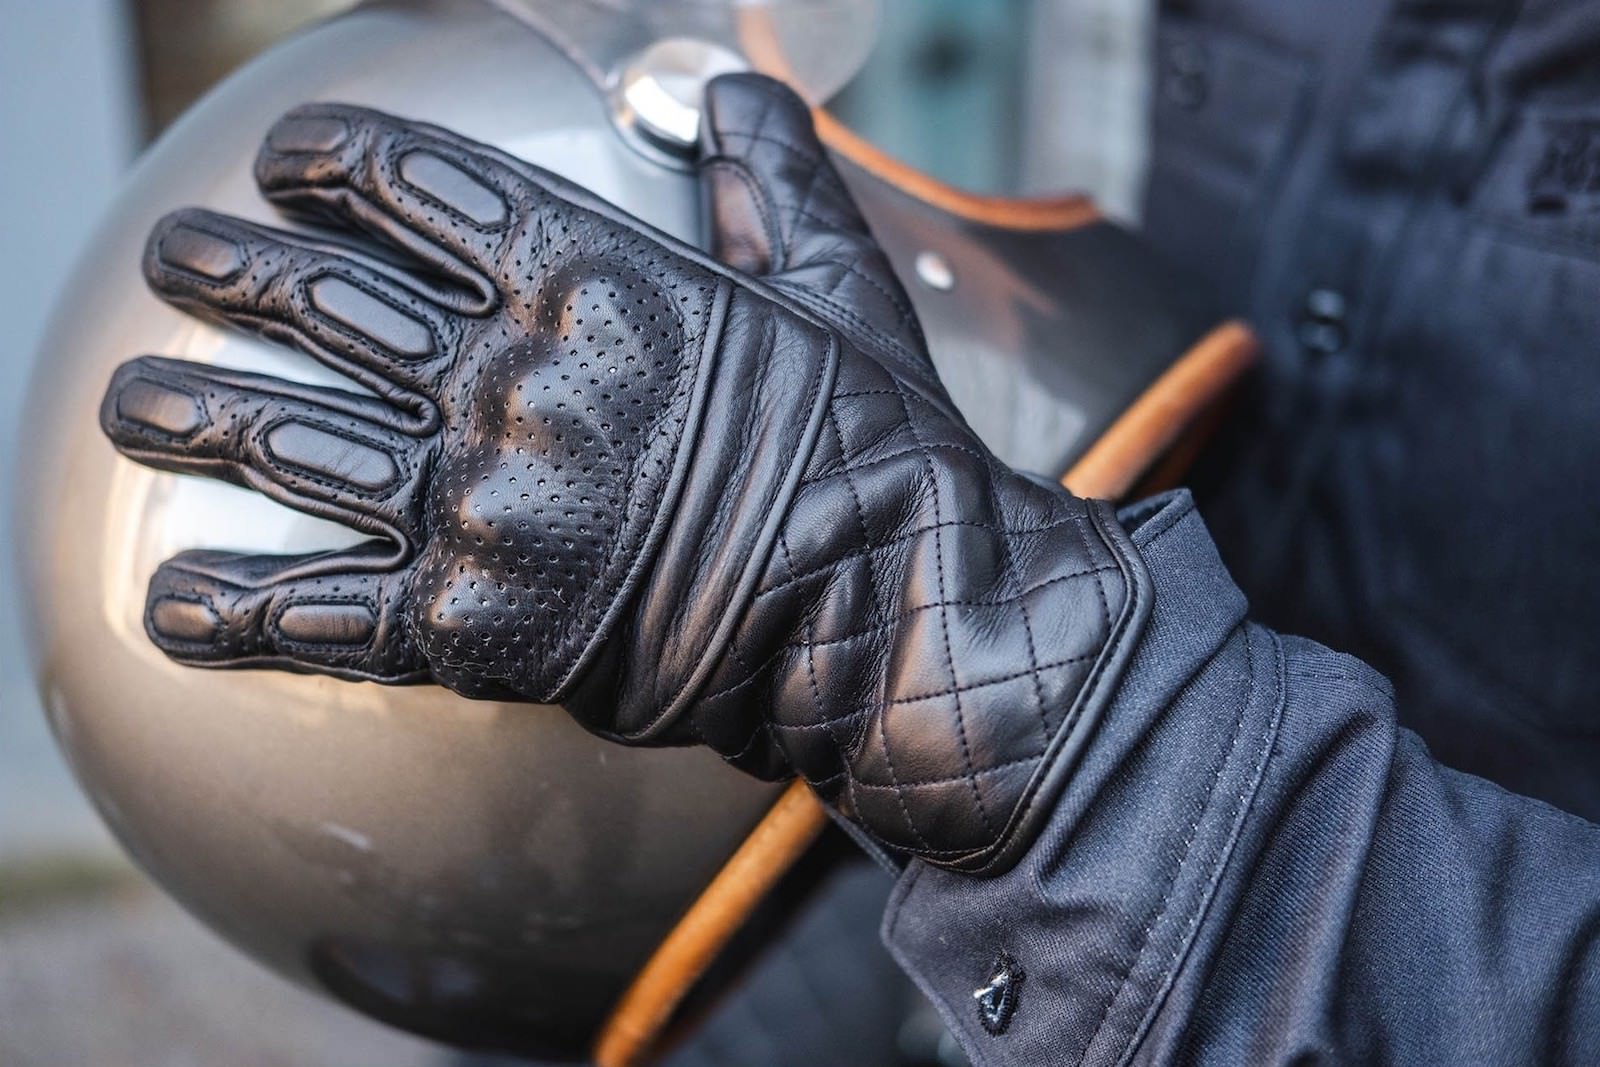 BSMC x Goldtop Motorcycle Gloves - Made From 1.2mm Aniline Leather